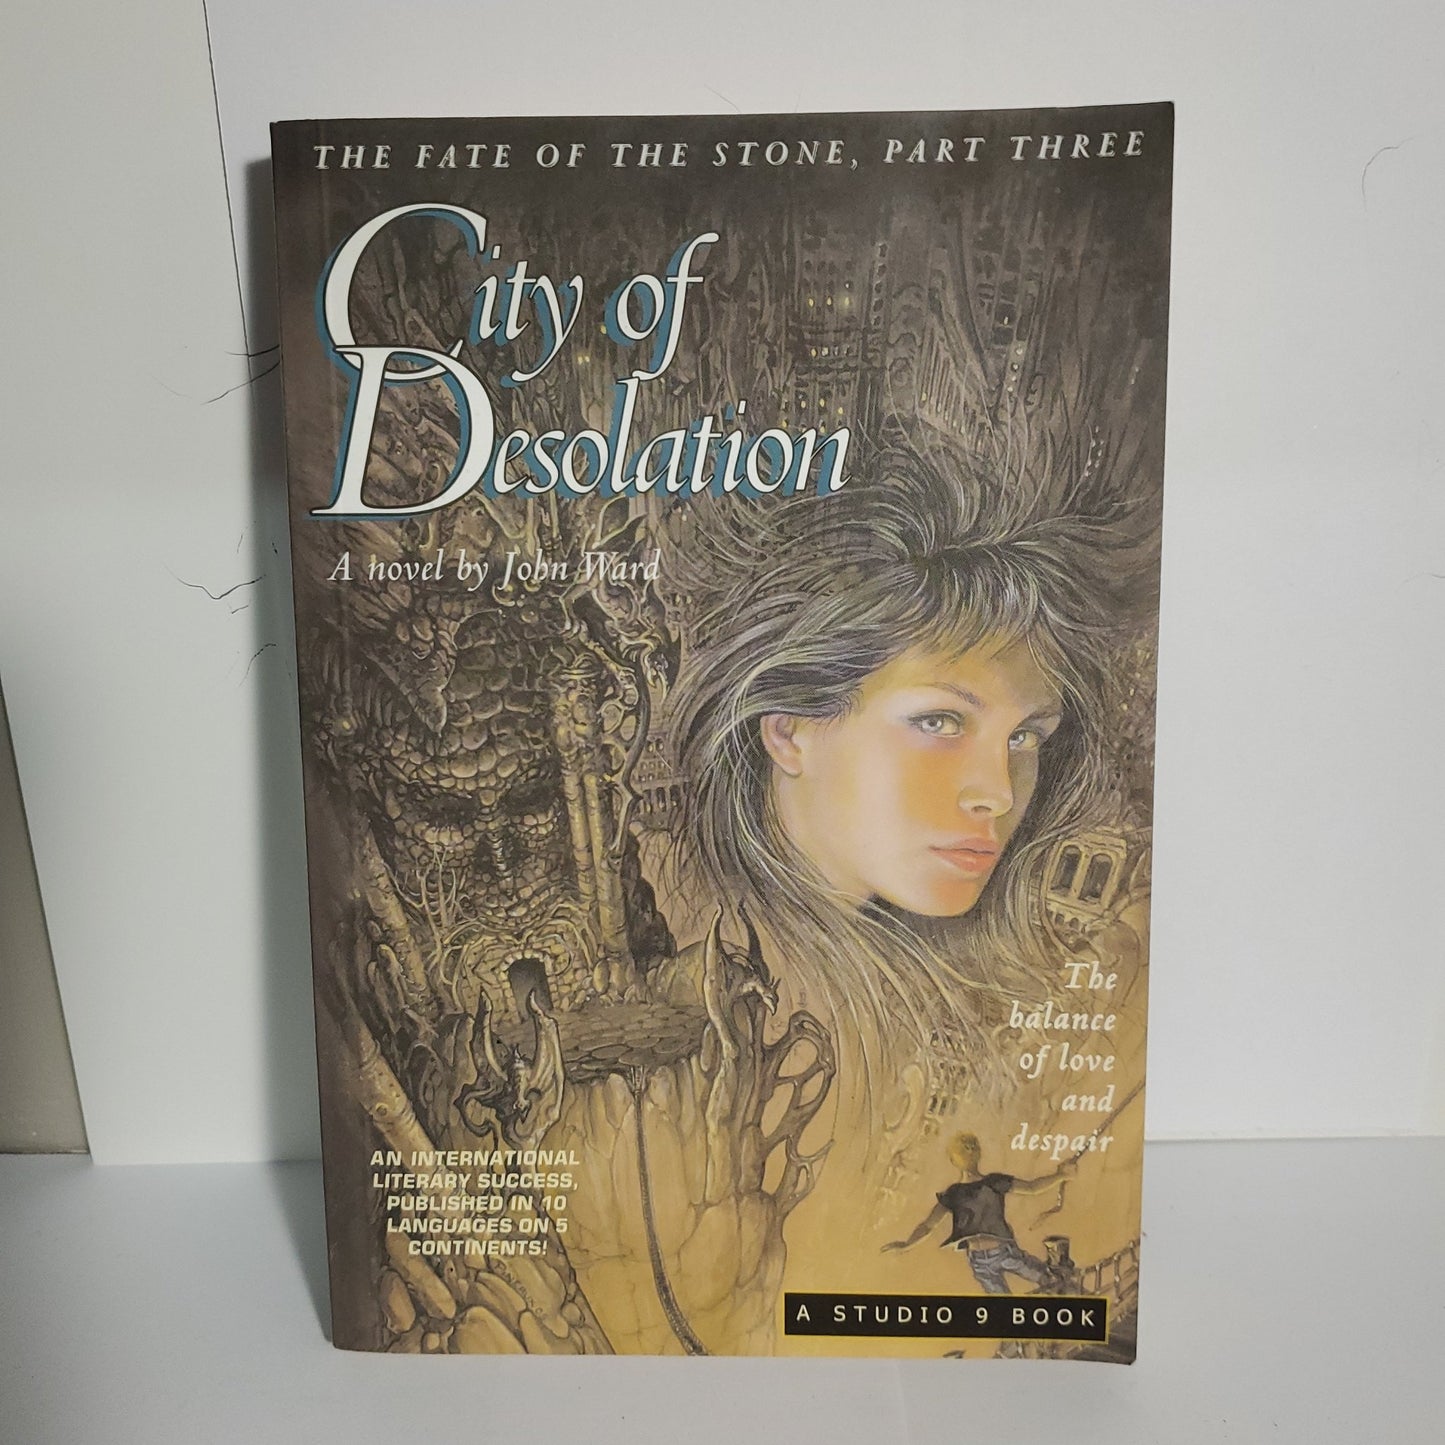 City of Desolation - [ash-ling] Booksellers